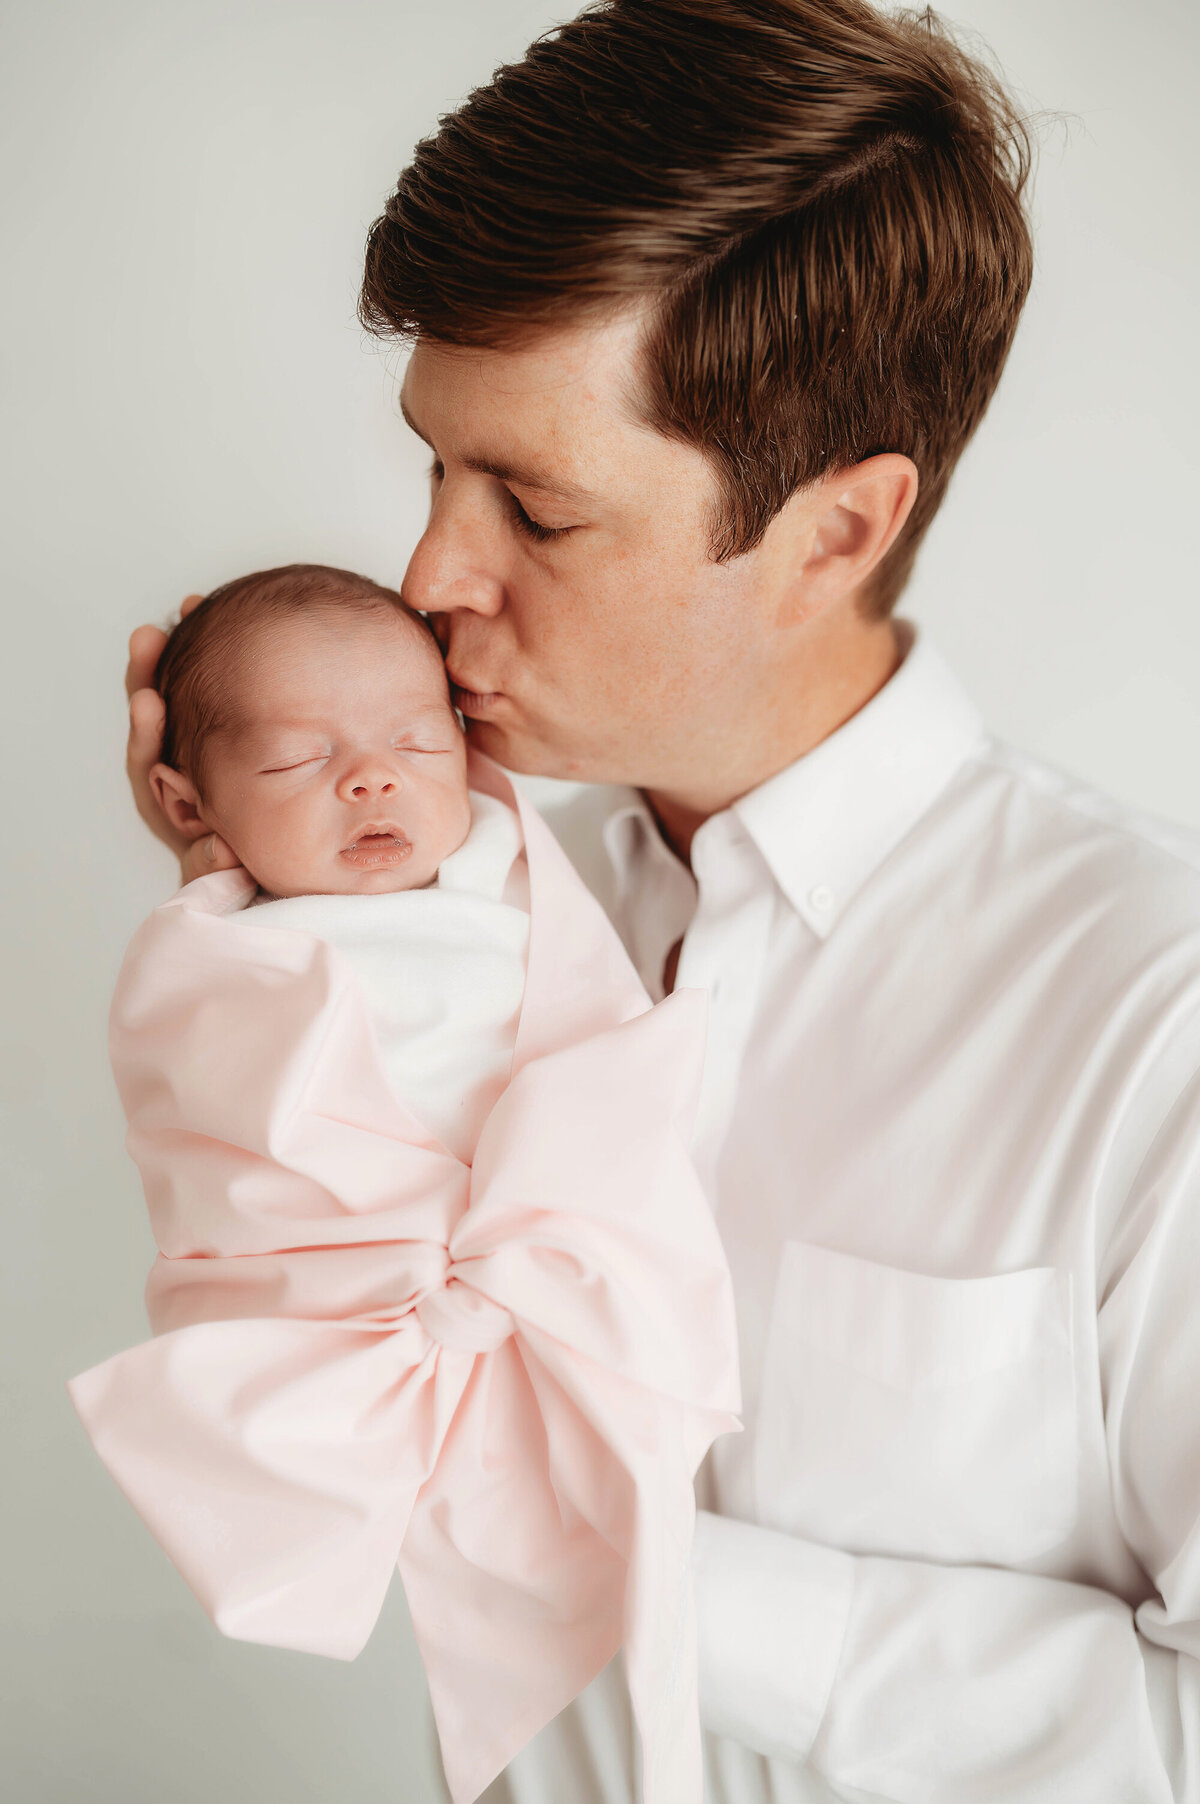 Father kisses his infant during Newborn Portrait Session in Asheville.